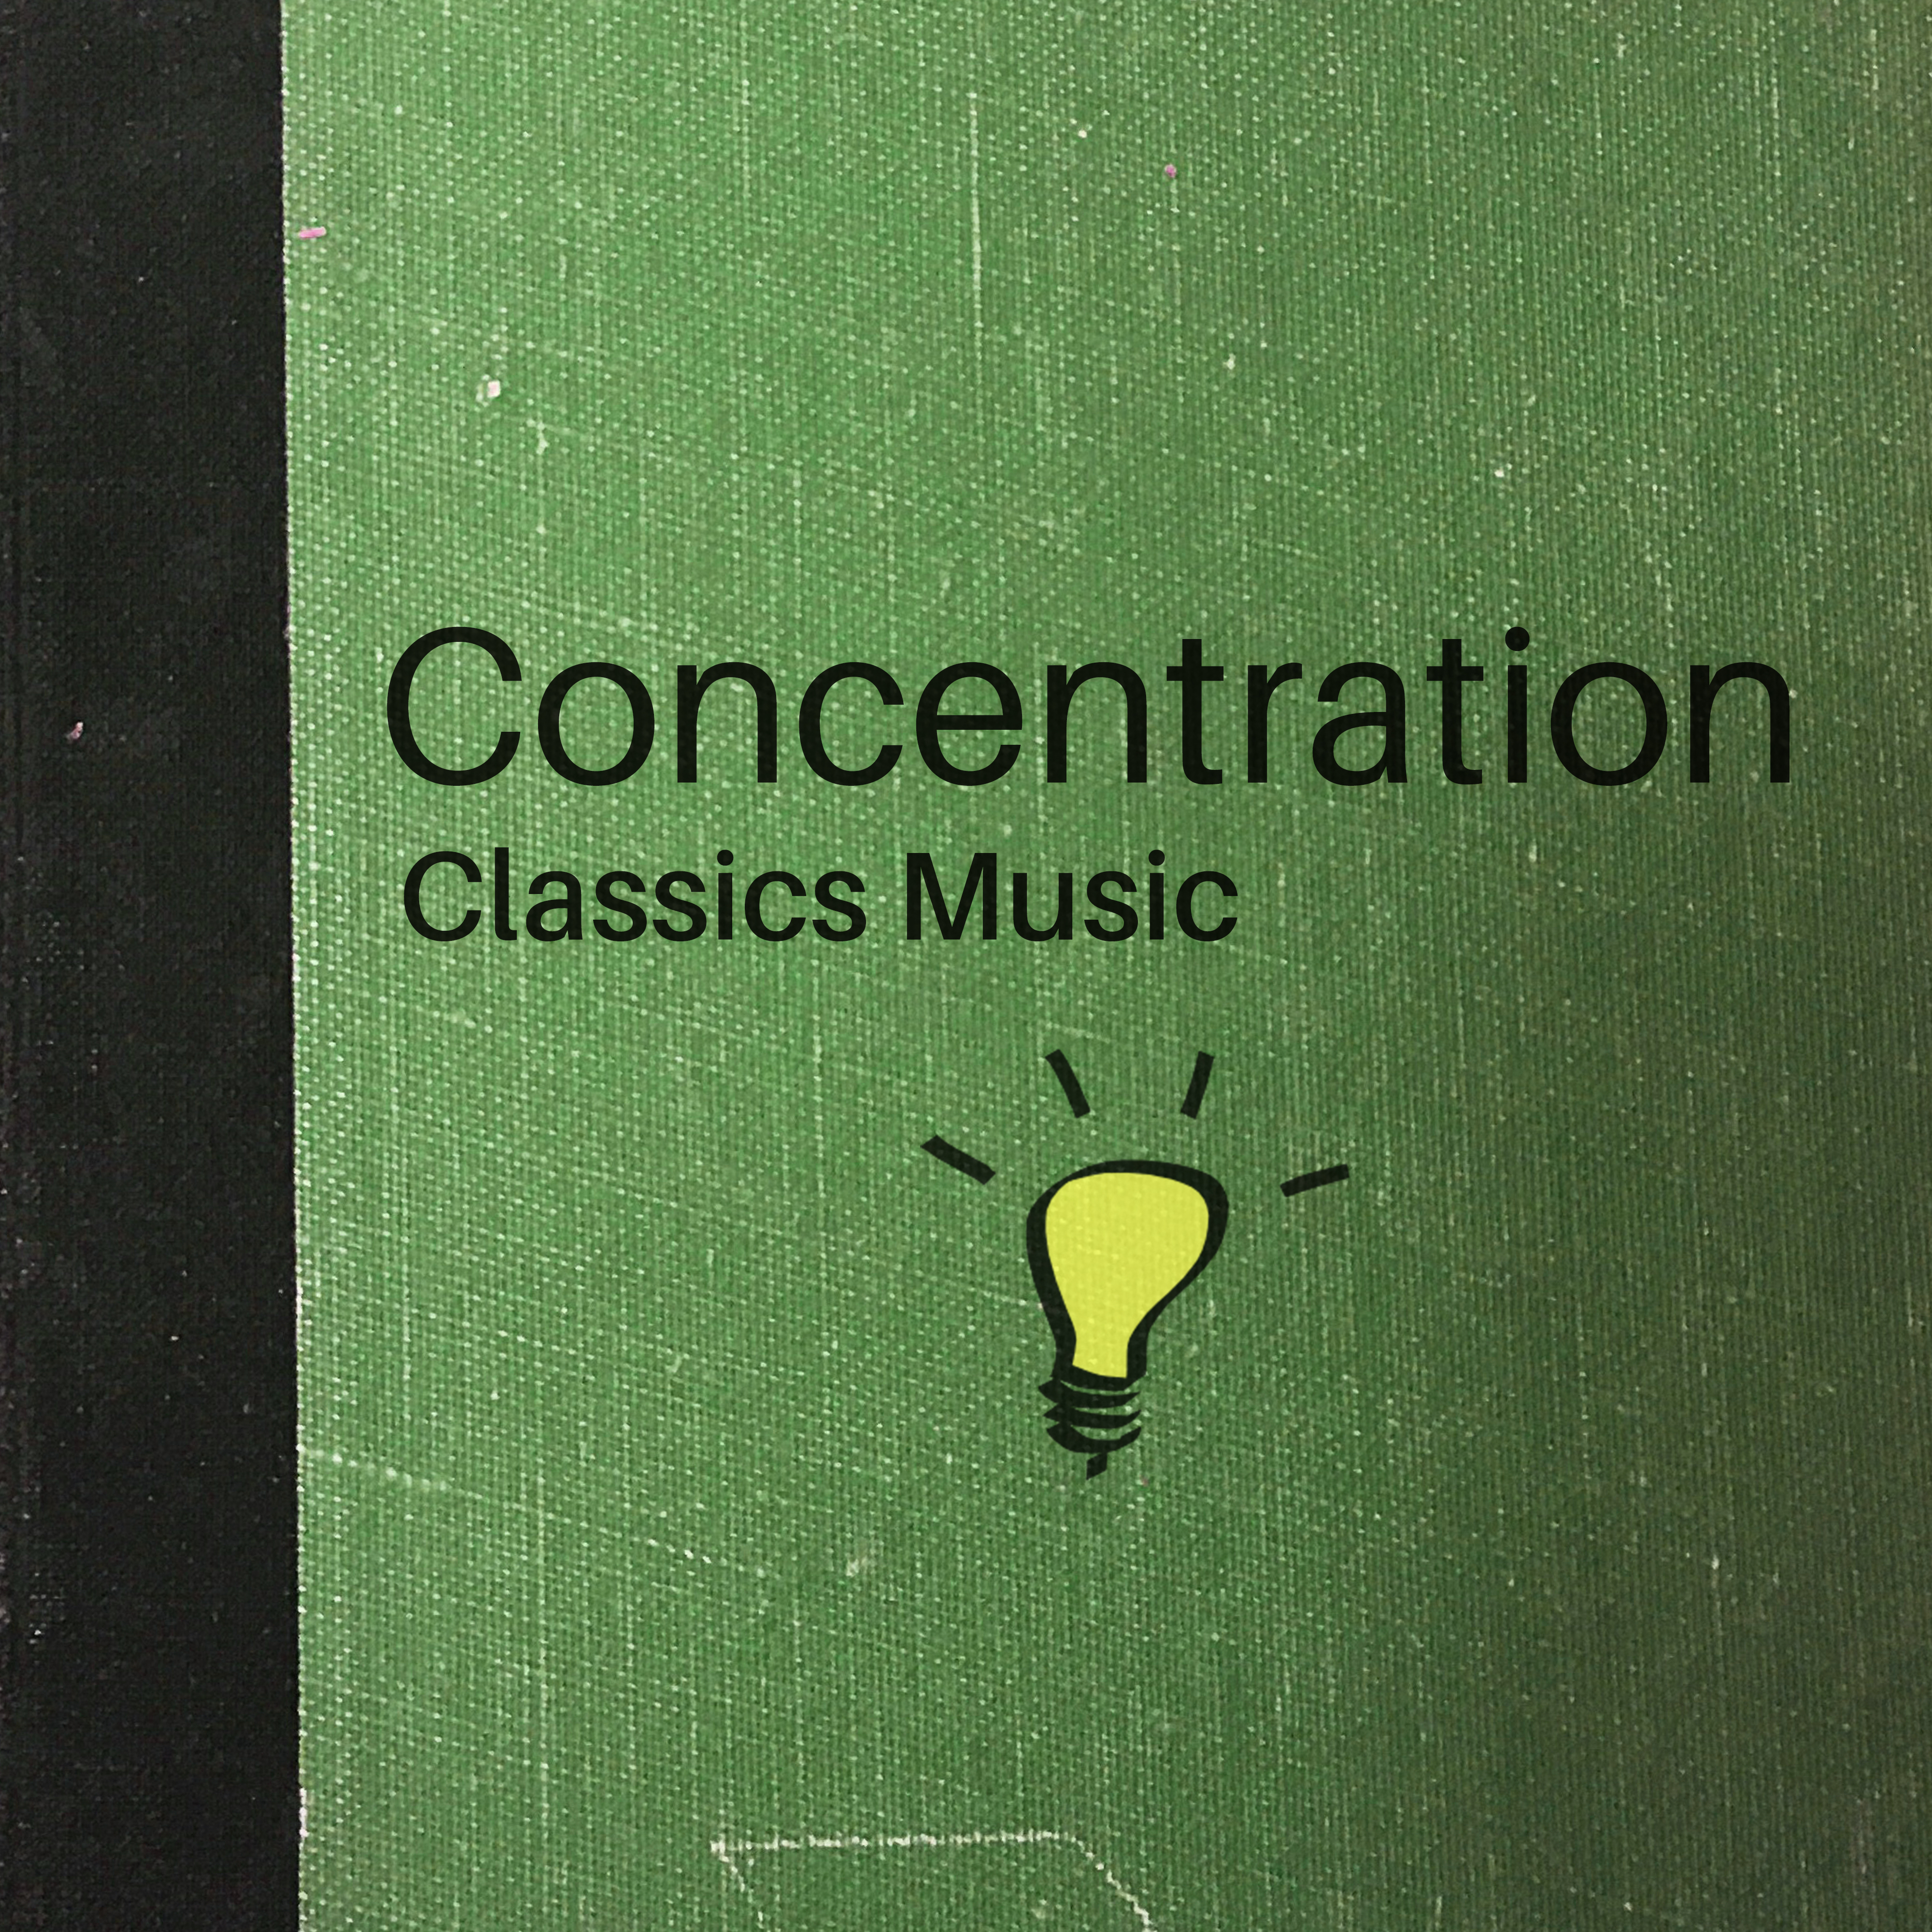 Concentration Classics Music  Soft Classical Songs, Easy Listening, Focus on Task